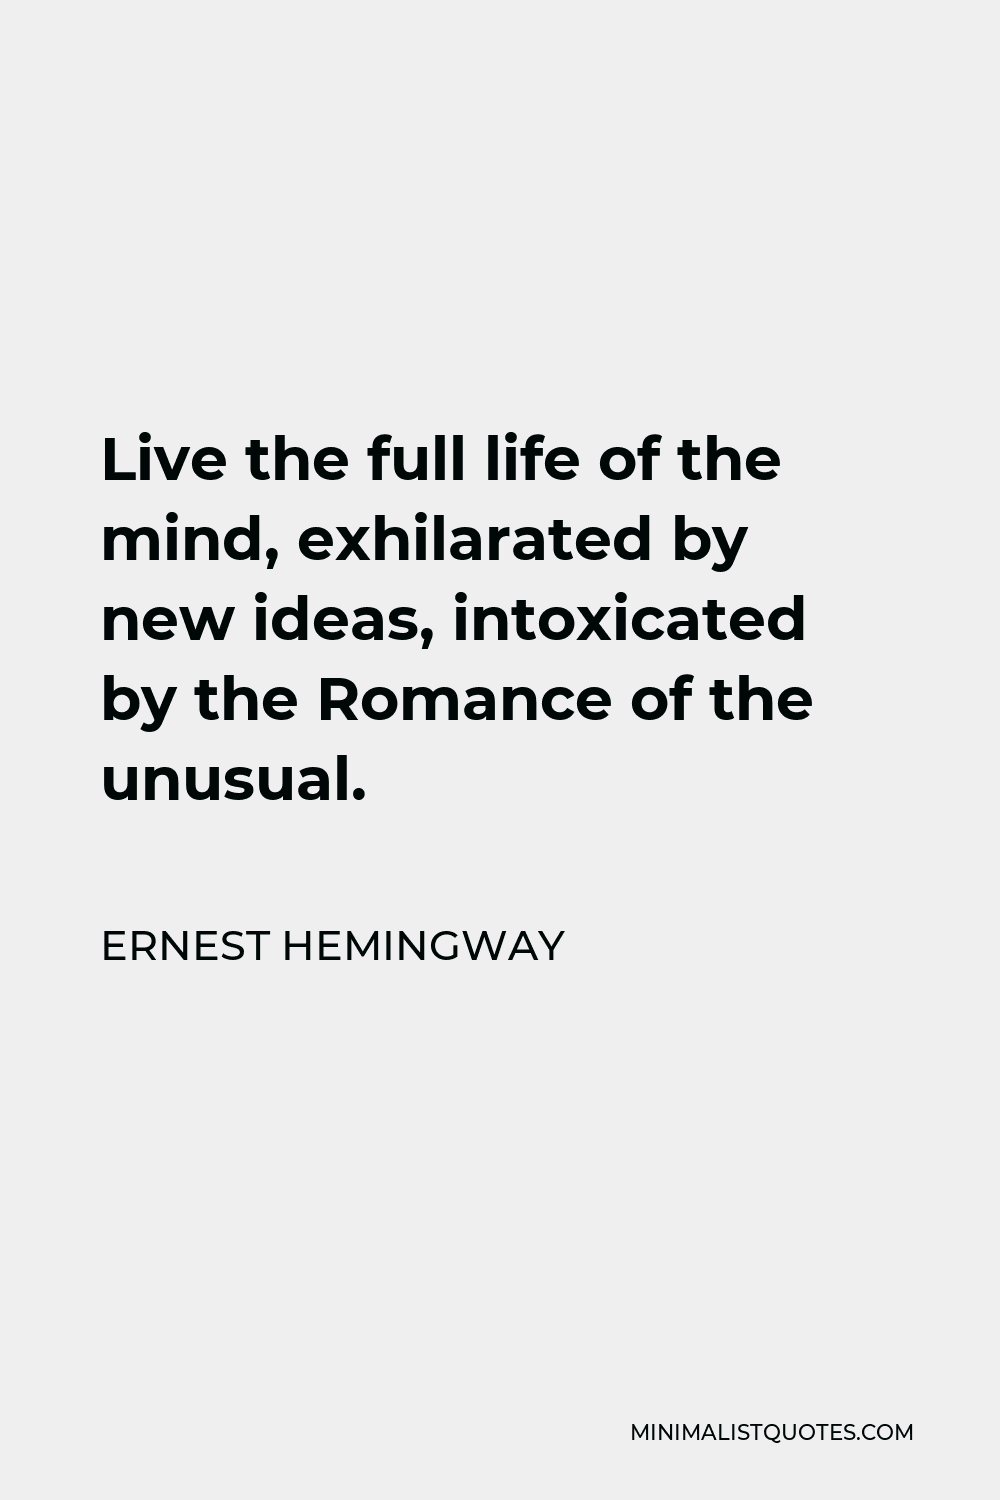 Ernest Hemingway Quote - Live the full life of the mind, exhilarated by new ideas, intoxicated by the Romance of the unusual.